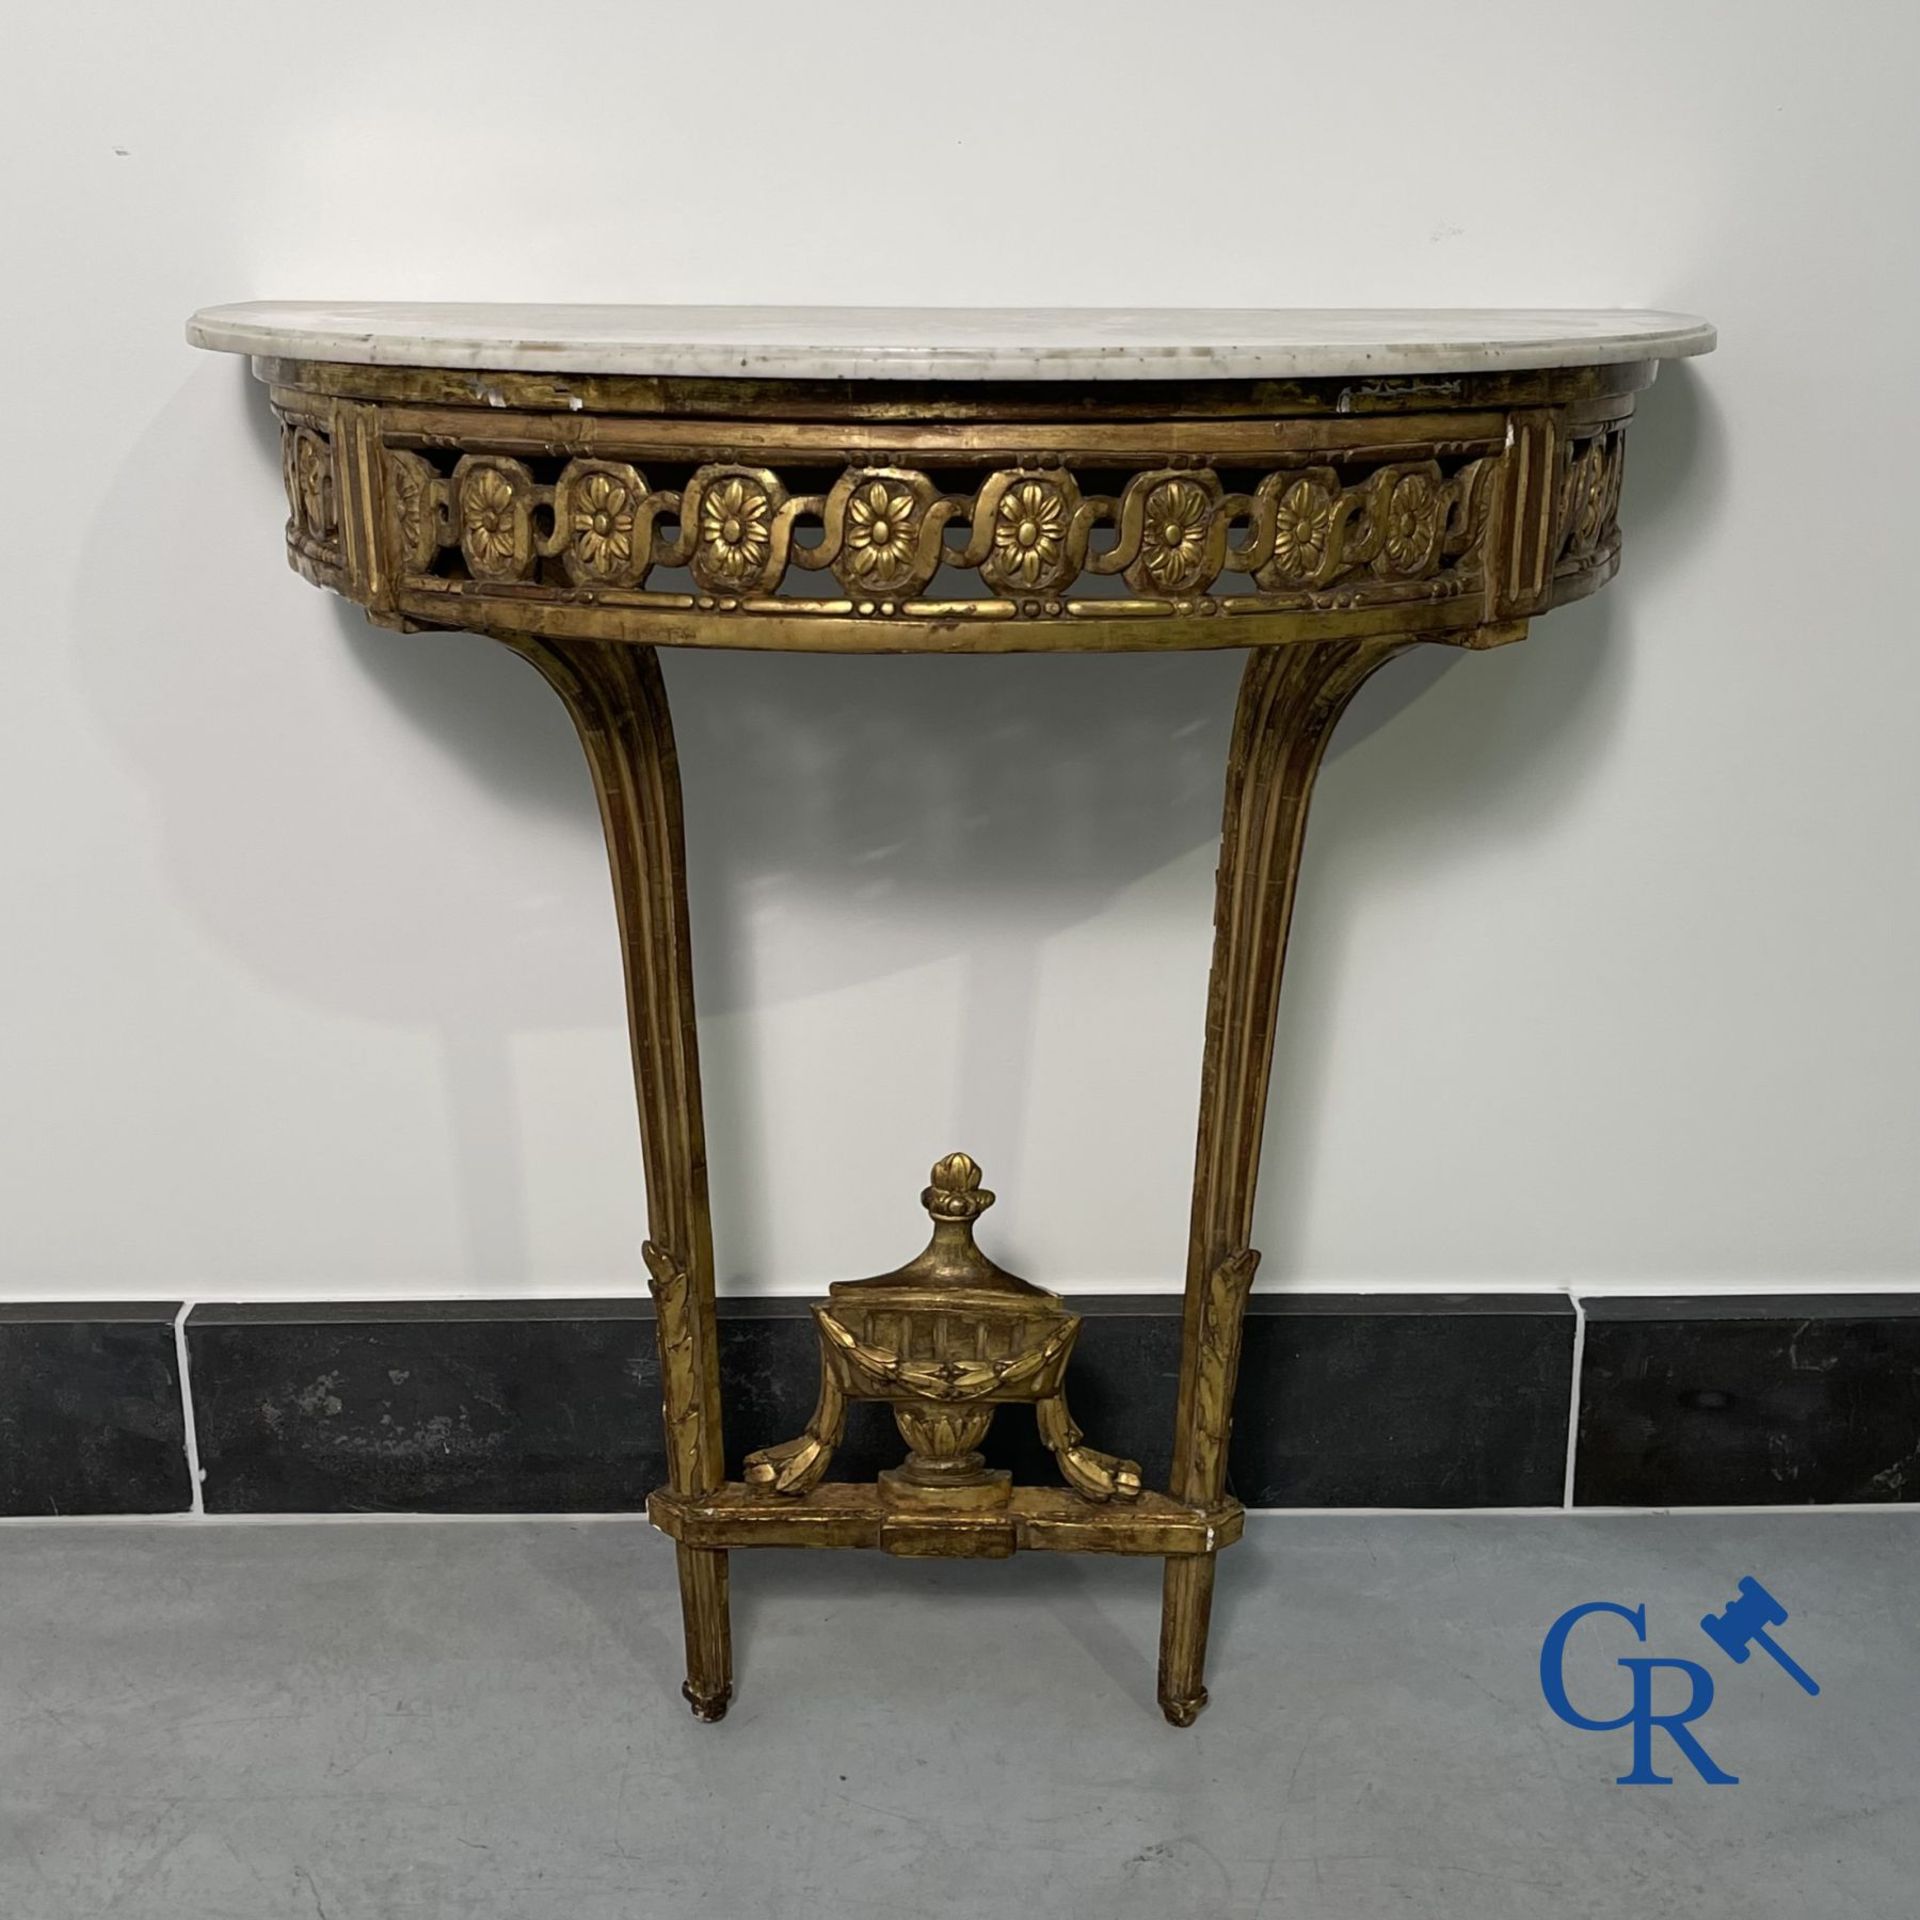 Furniture: Wood sculpted and gilded crescent shaped console. LXVI-period.